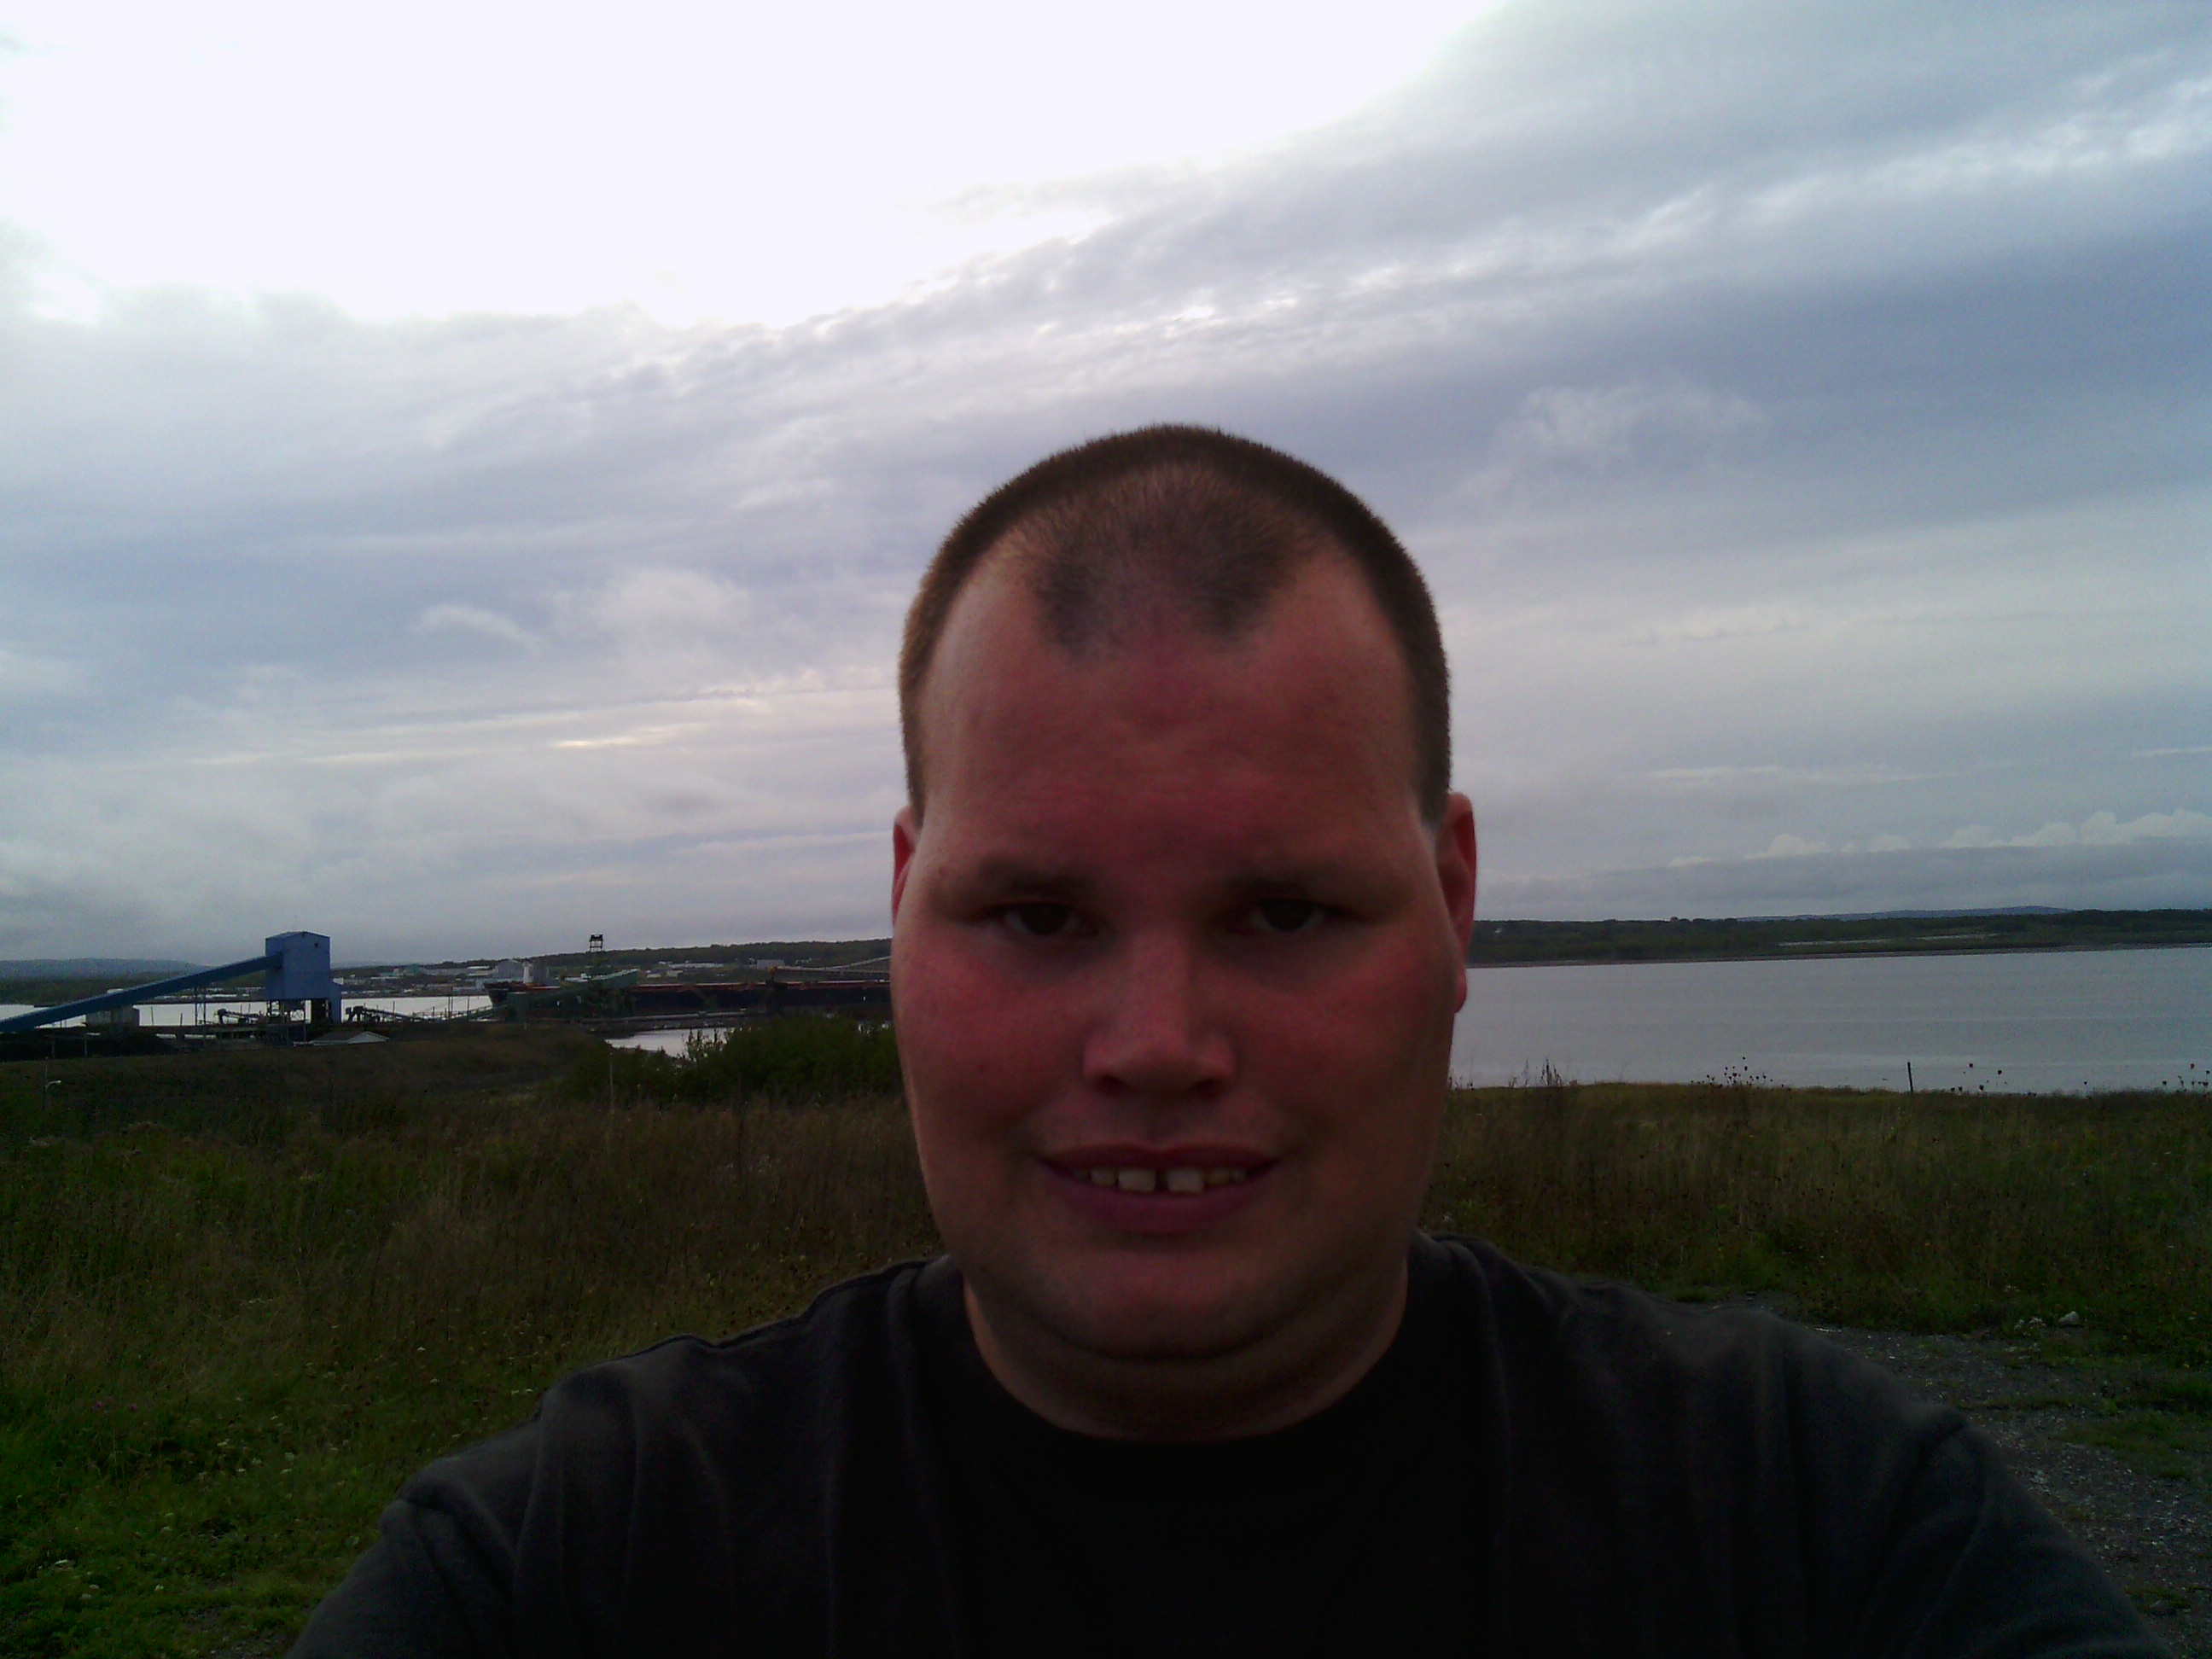 Frankie MacDonald enjoying his day after it rained in Sydney Nova Scotia from Thursday all the way until Sunday Morning.